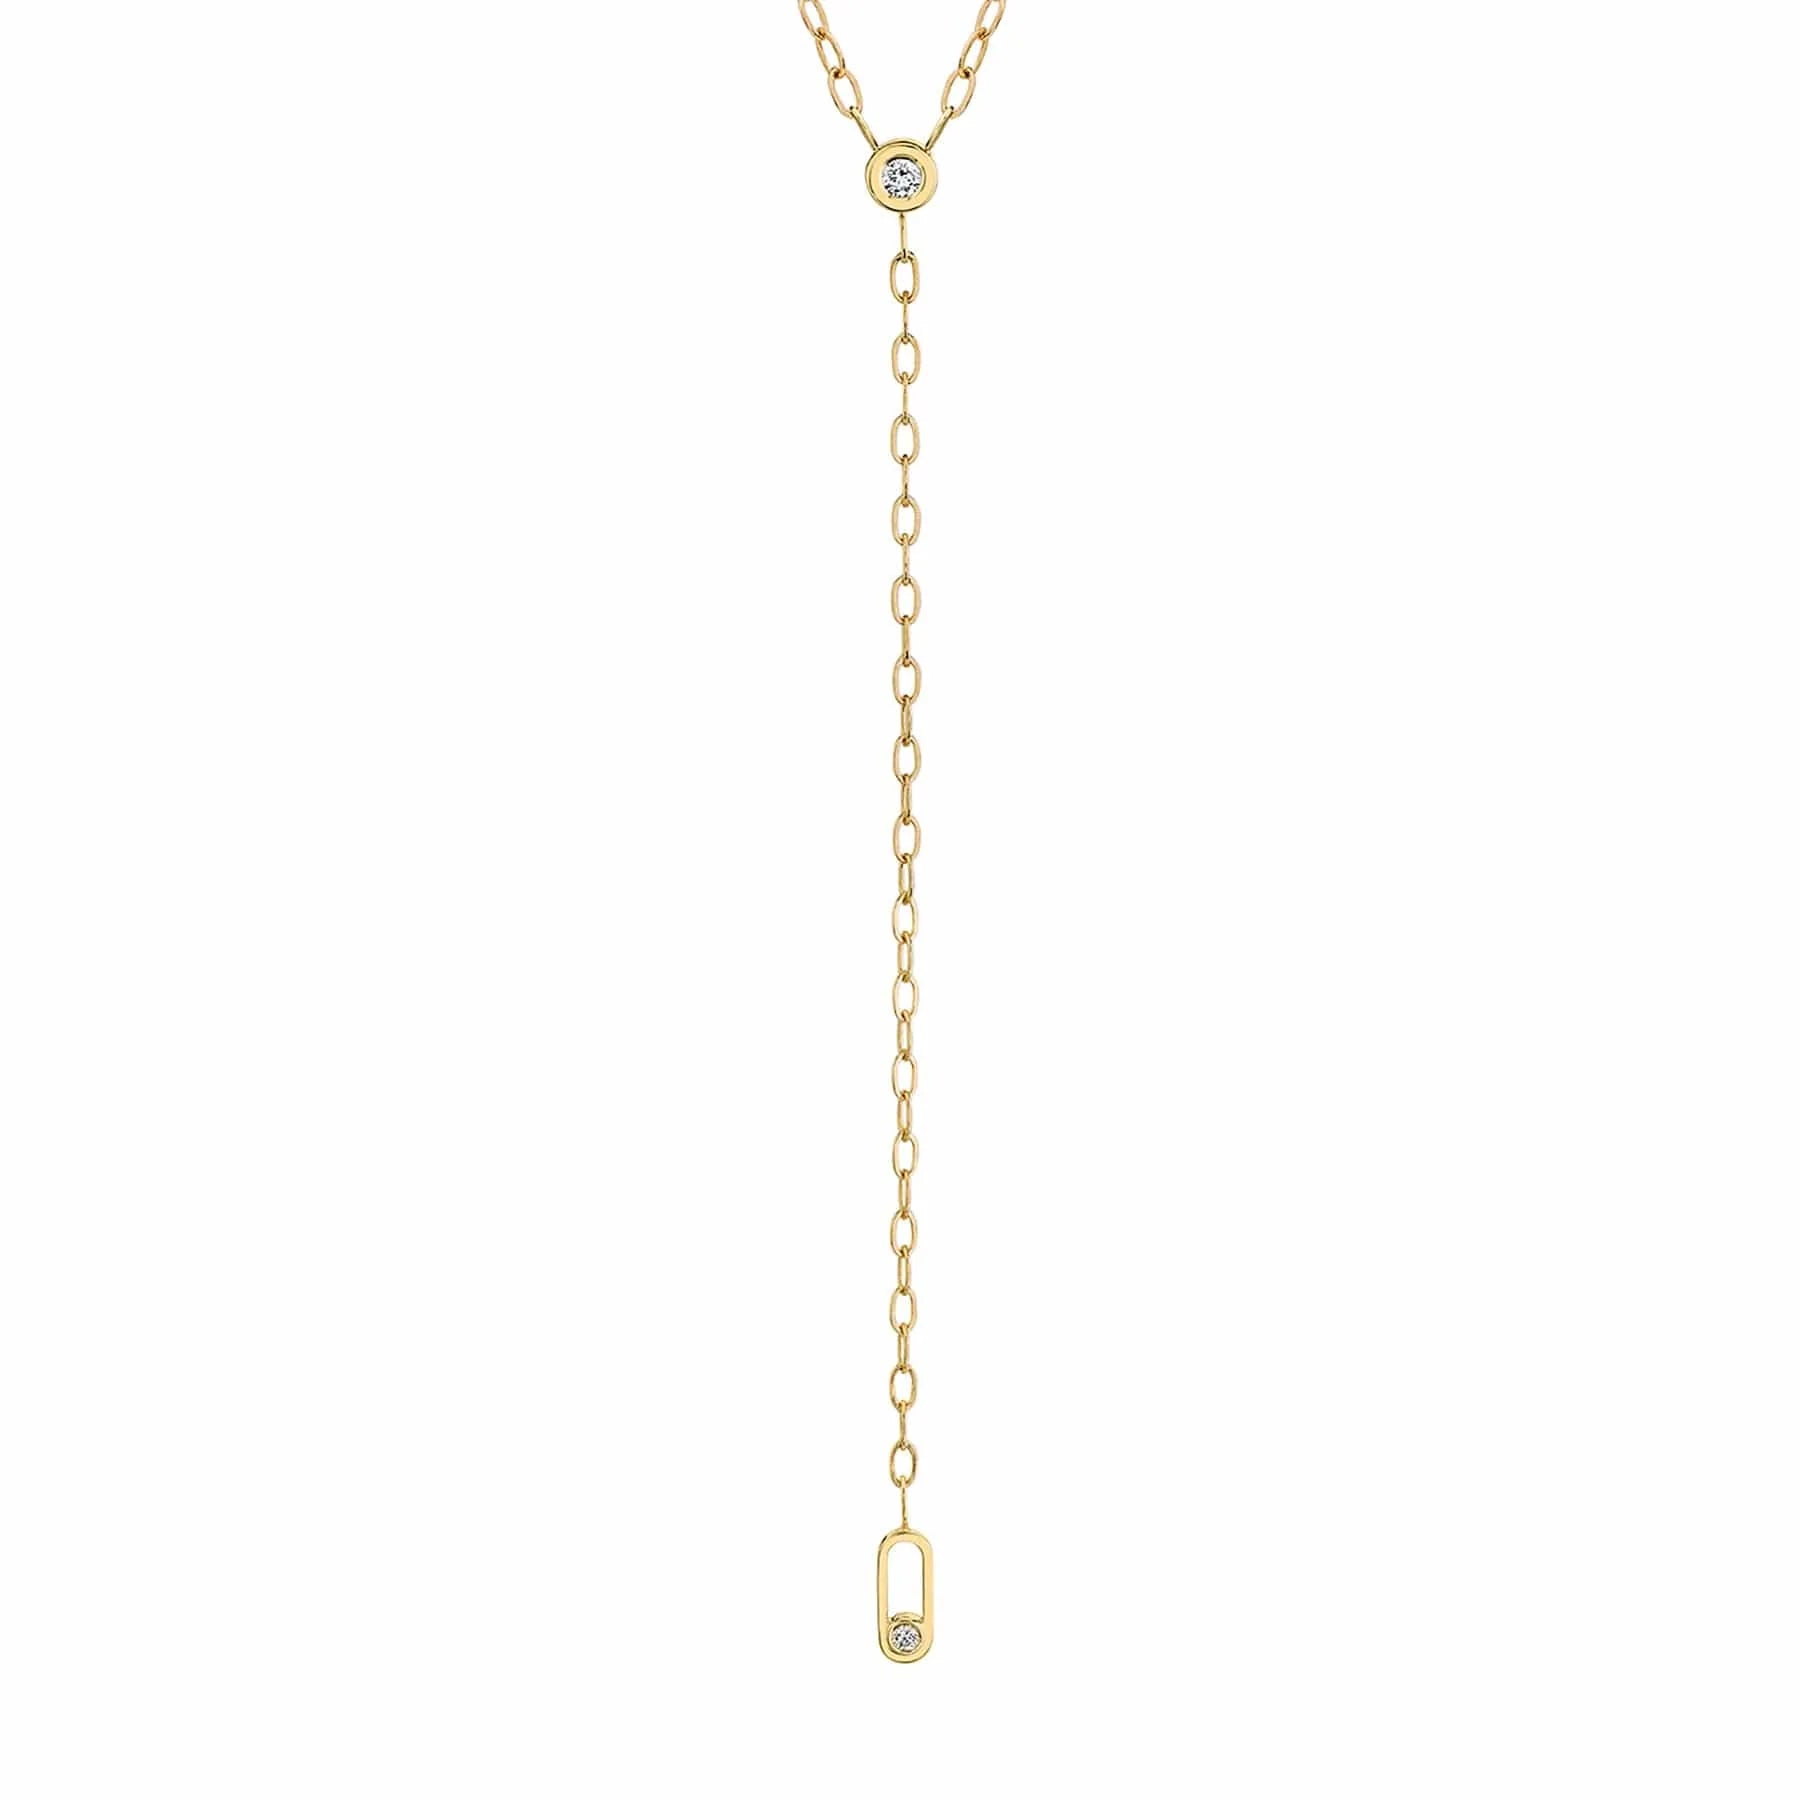 MICHAEL M Necklaces 14K Yellow Gold Streamlined Y-Necklace CN352